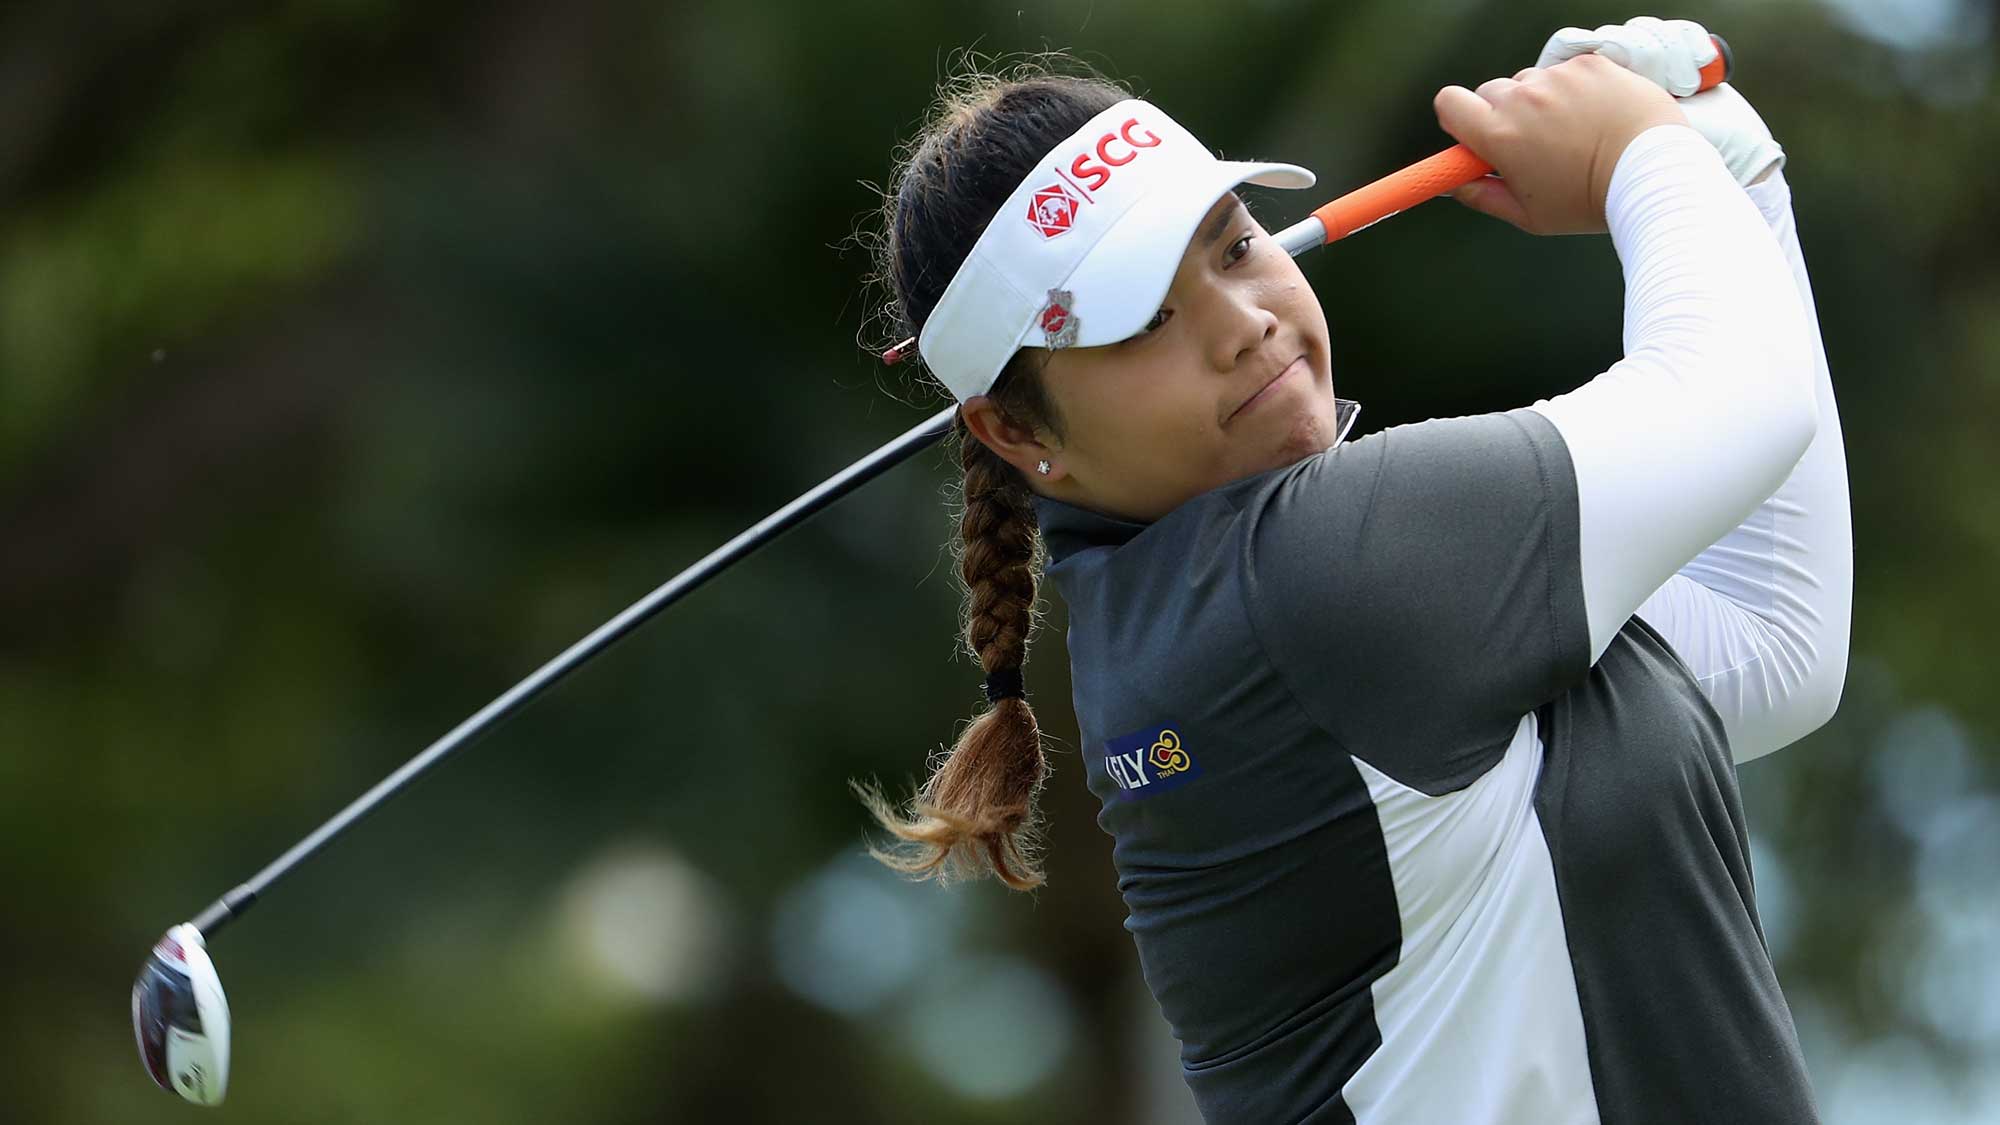 Ariya Jutanugarn of Thailand plays a tee shot on the eighth hole during the first round of the LPGA LOTTE Championship Presented By Hershey